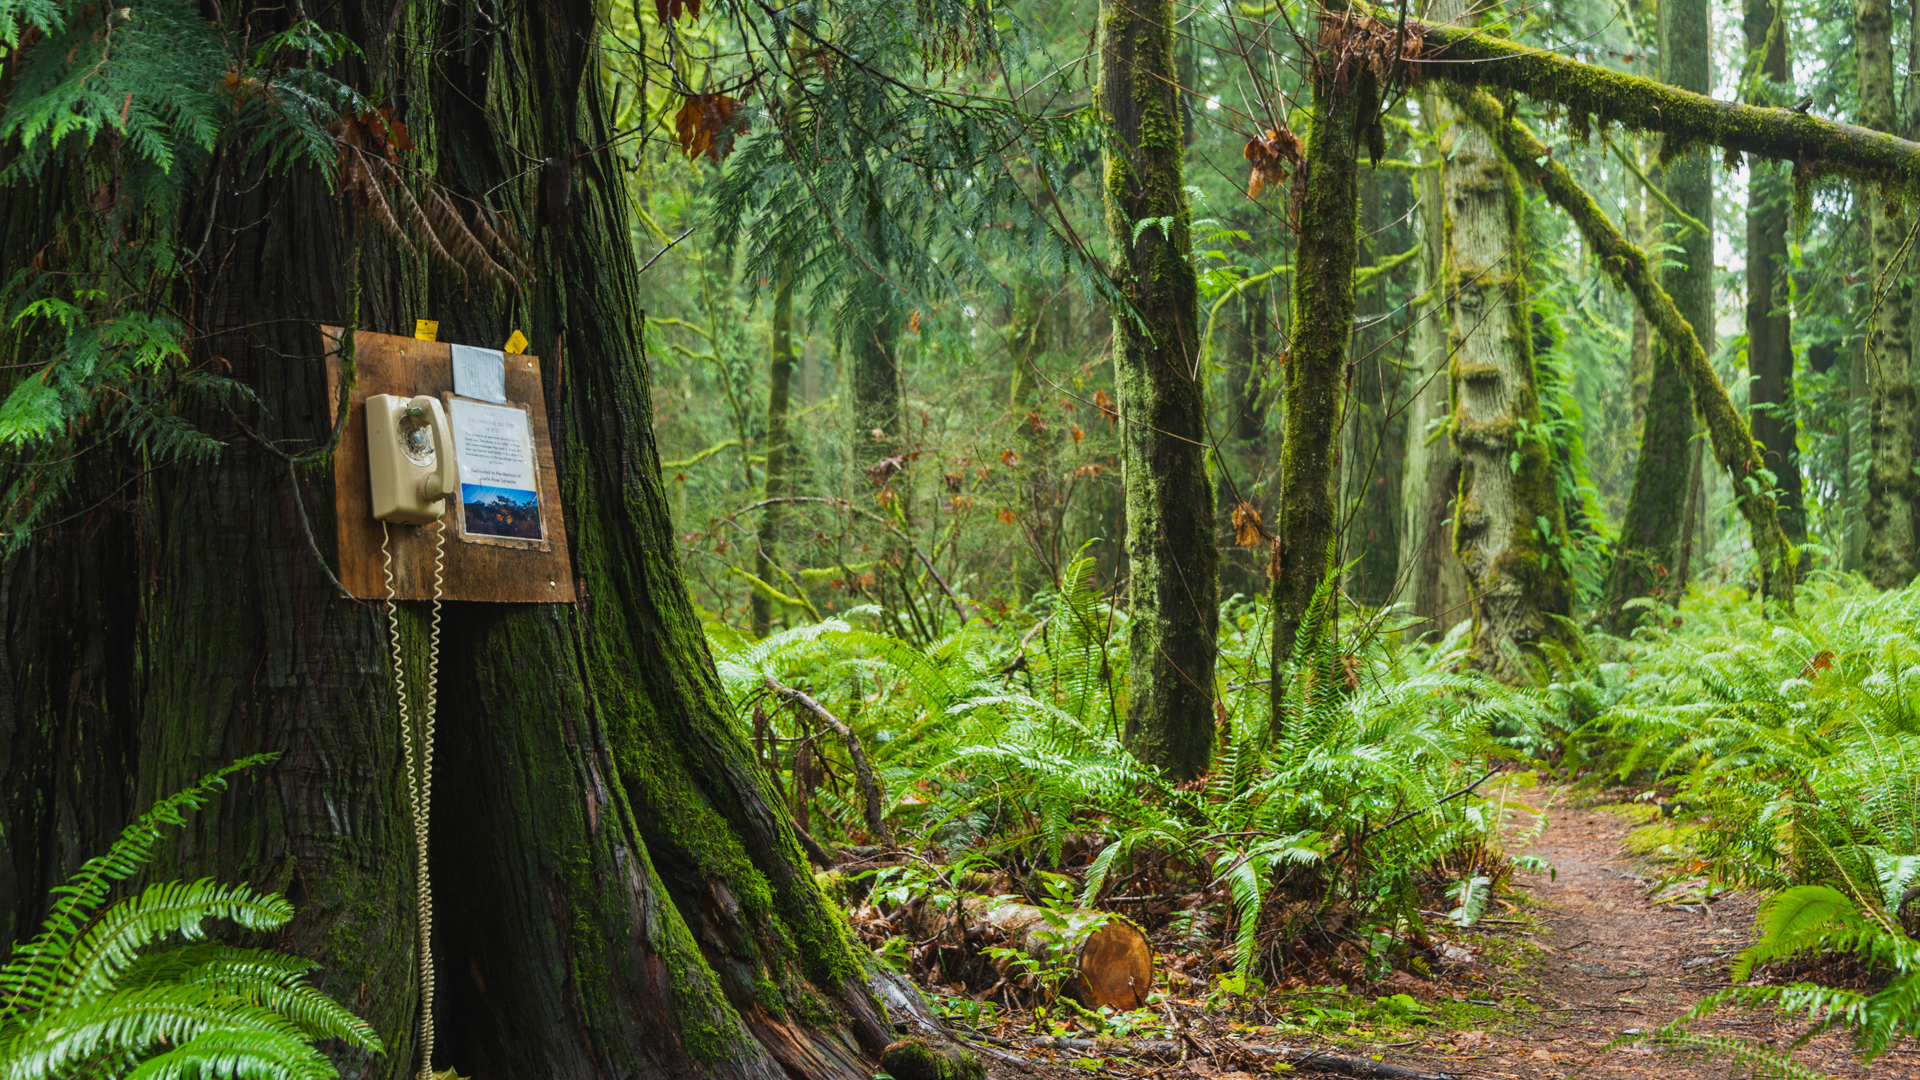 A Phone in the Forest Helps Grieving Talk with Loved Ones